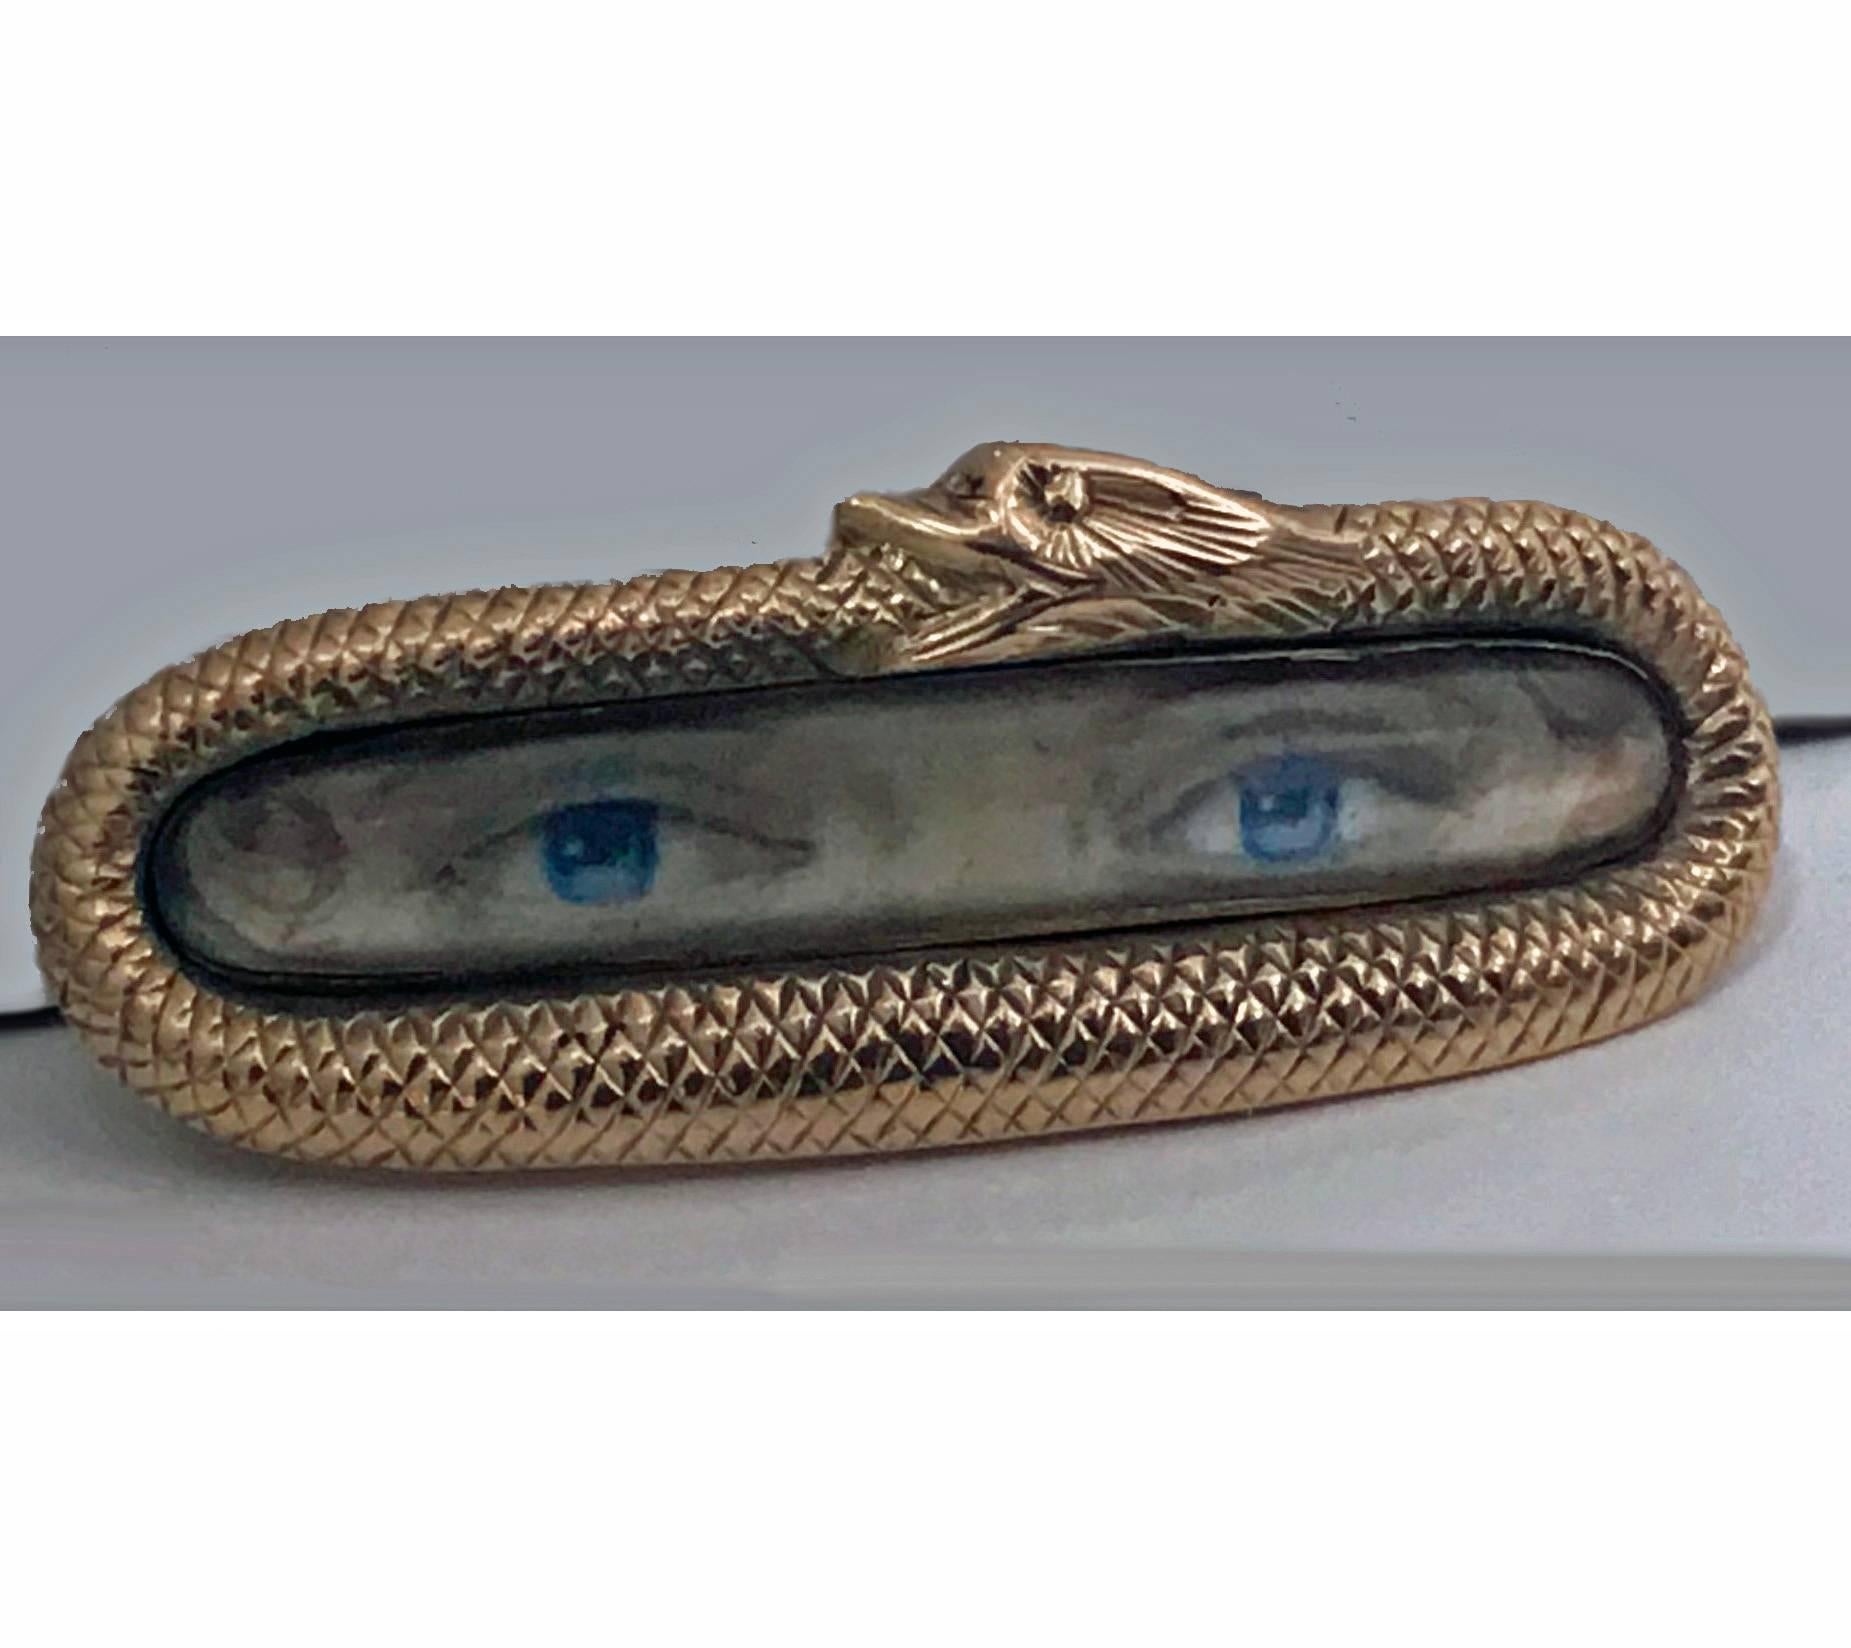 Rare Georgian Double Lover's Eye Brooch, English C.1800. The Brooch depicting a pair of blue eyes within a gold serpent frame . Length: 1 375 inches. Replaced pin stem, minor evidence of solder, reverse with monogram.